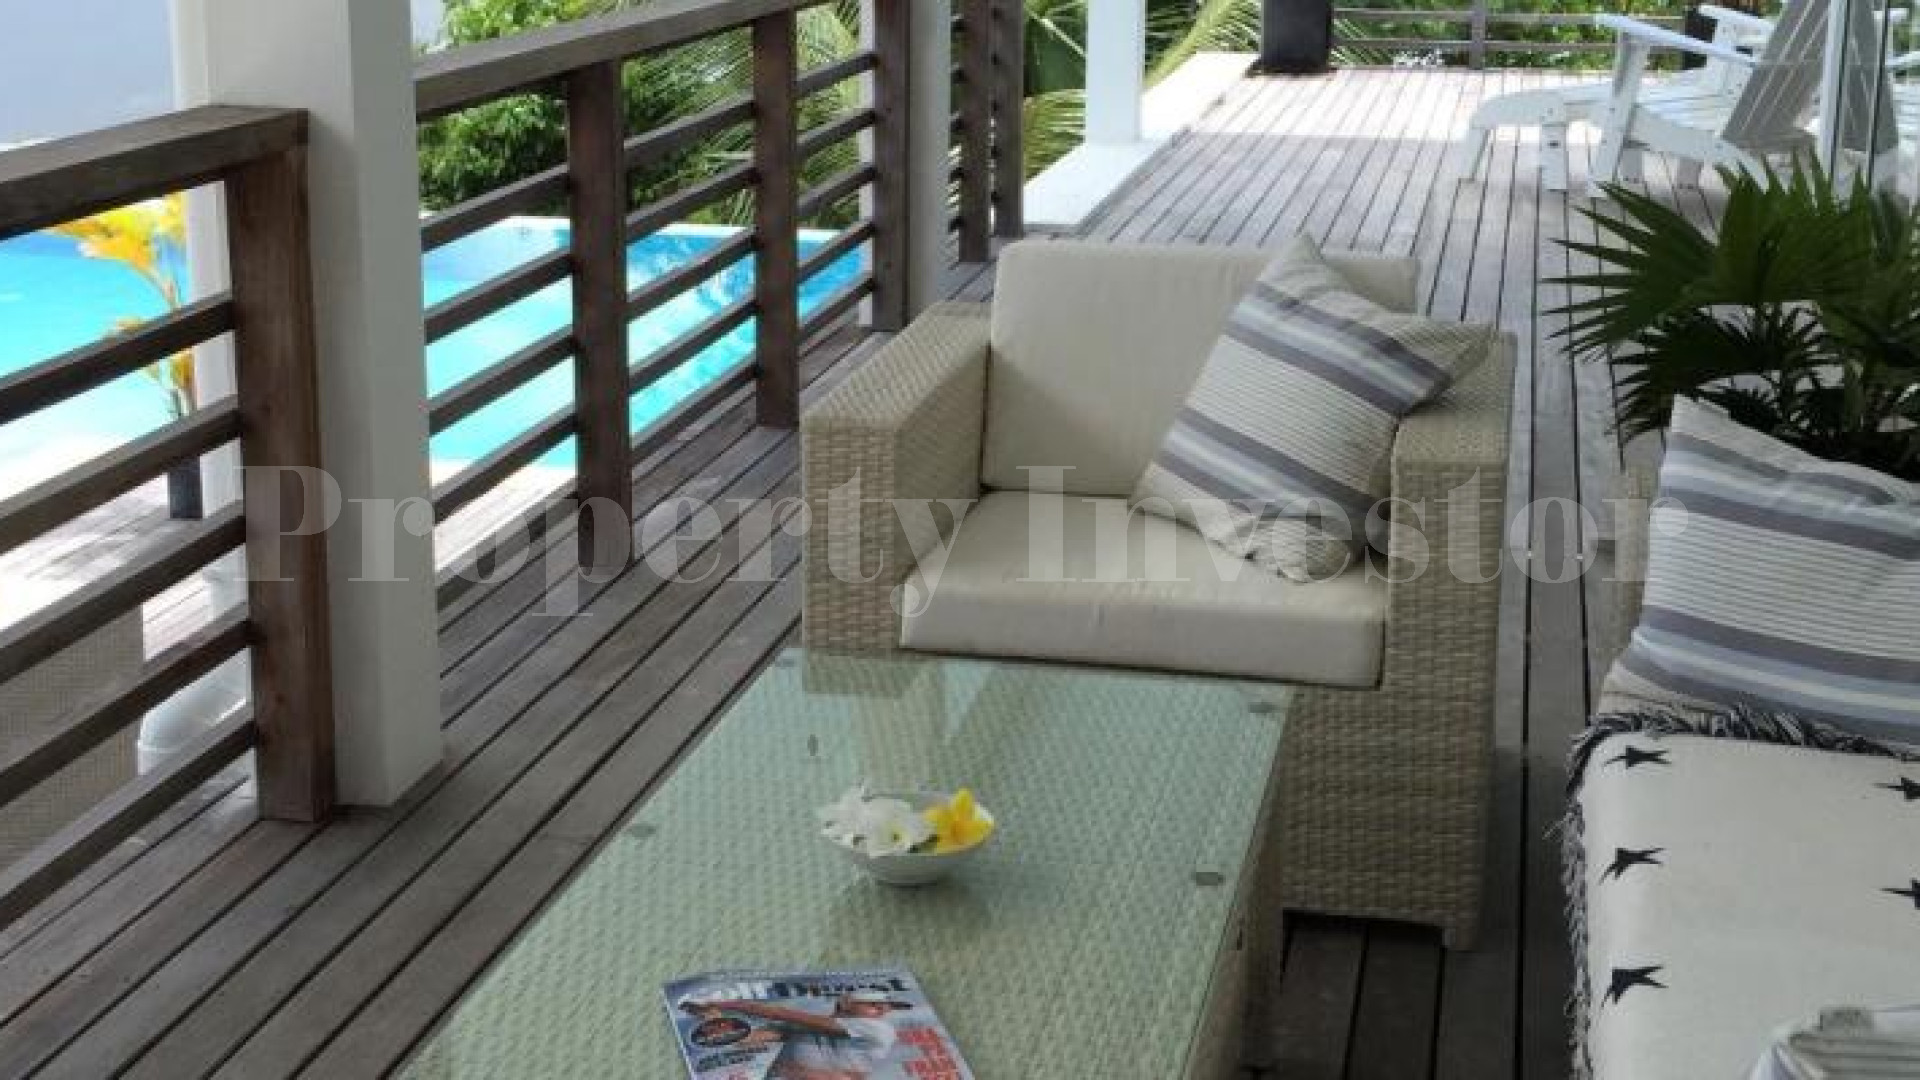 Fantastic 2 Bedroom Luxury Villa with Spectacular Panoramic Sea Views Overlooking Surfer's Beach, Seychelles